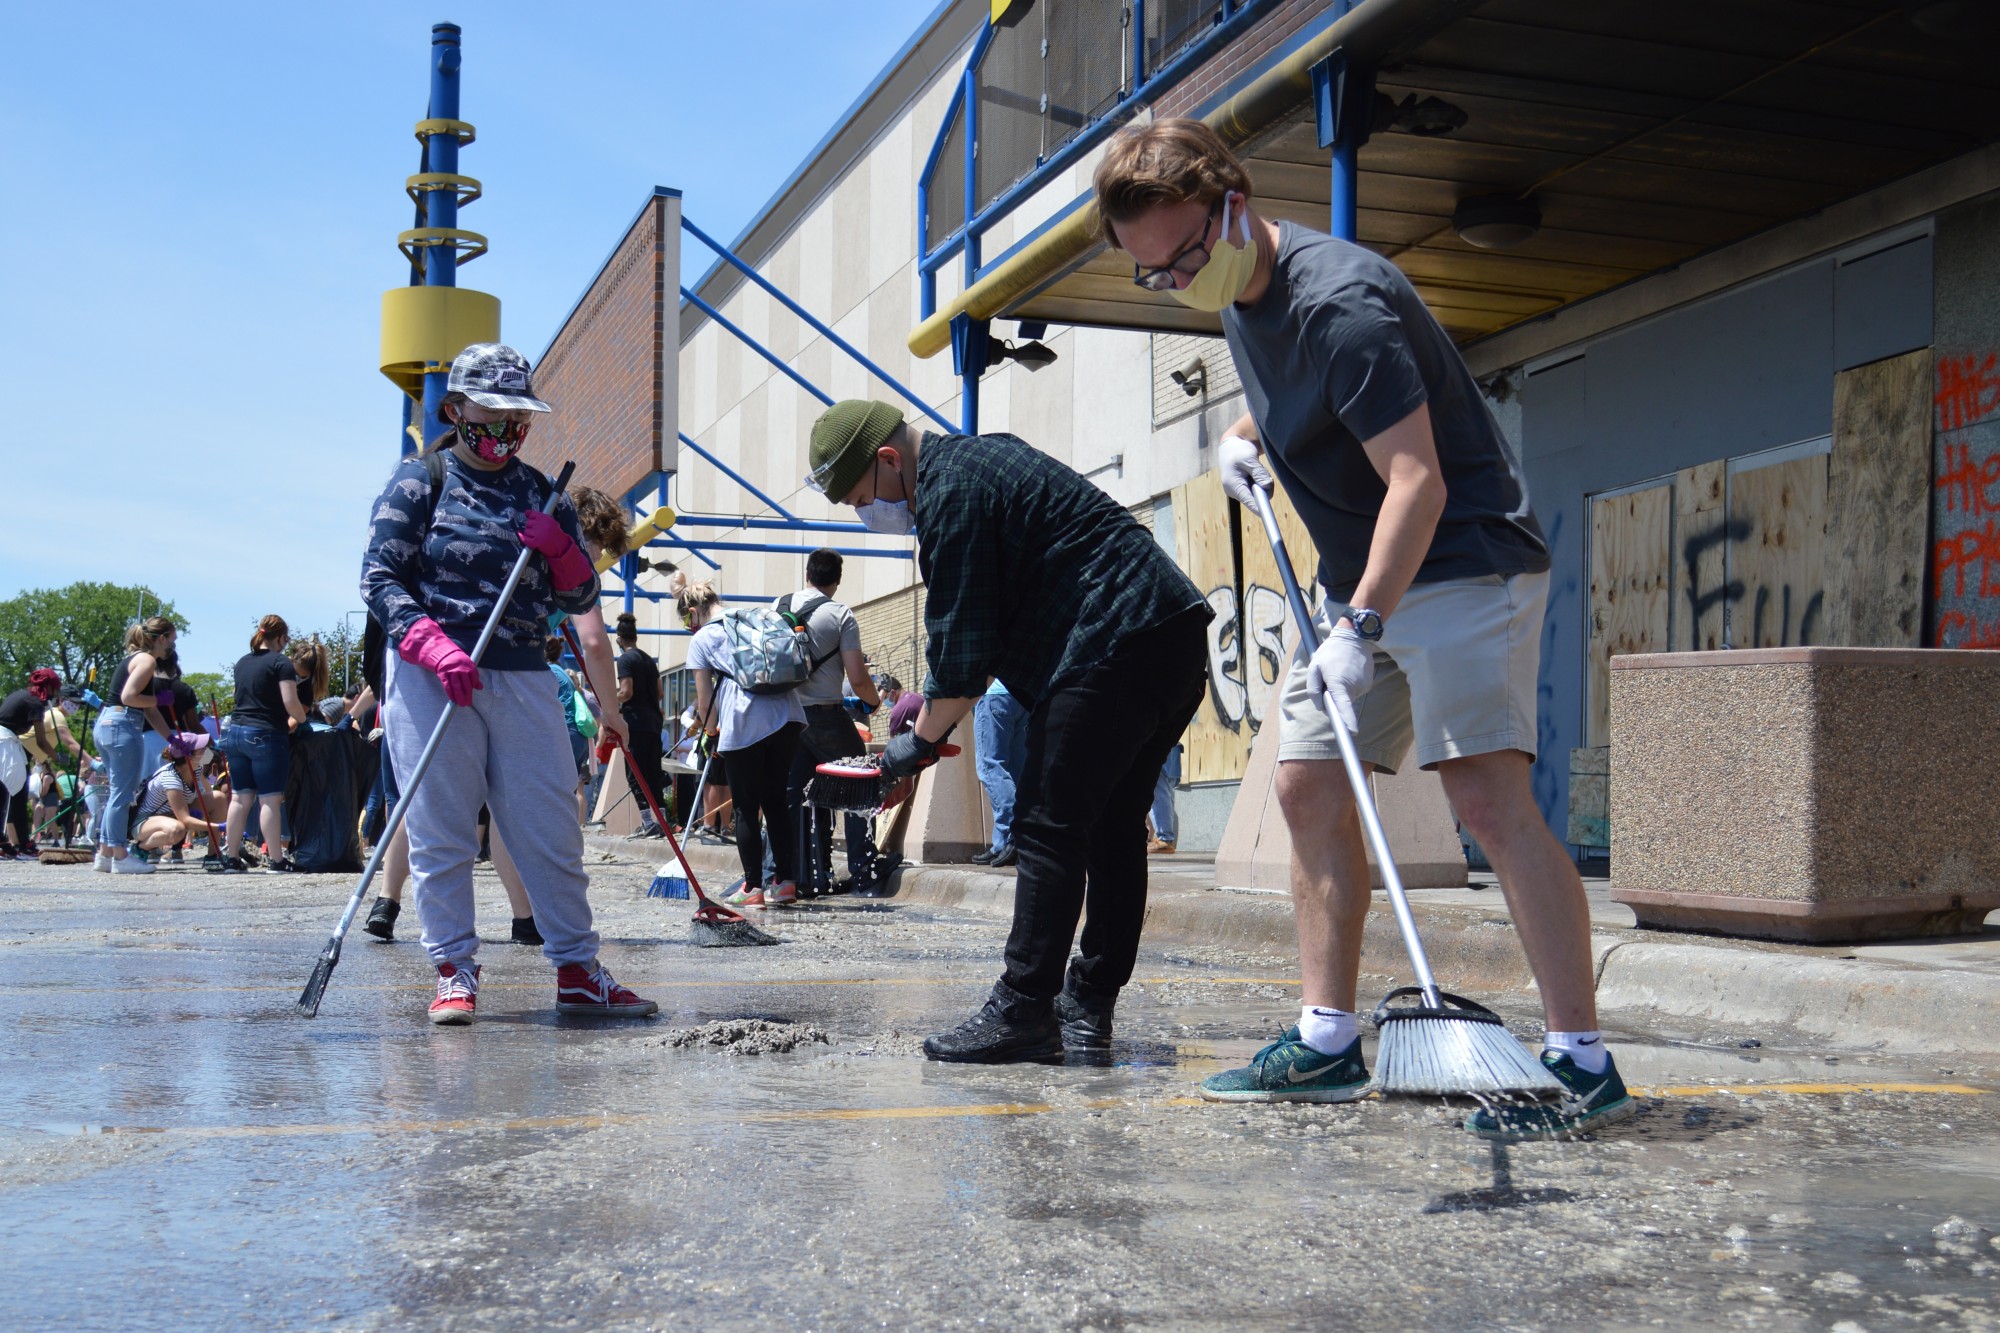 Jackson Hampton, right, works near the Hi-Lake Shopping Center in East Lake Street, just a few blocks from the Minneapolis Third Police Precinct, to help clear debris from the burned-down businesses on Sunday, May 31. 